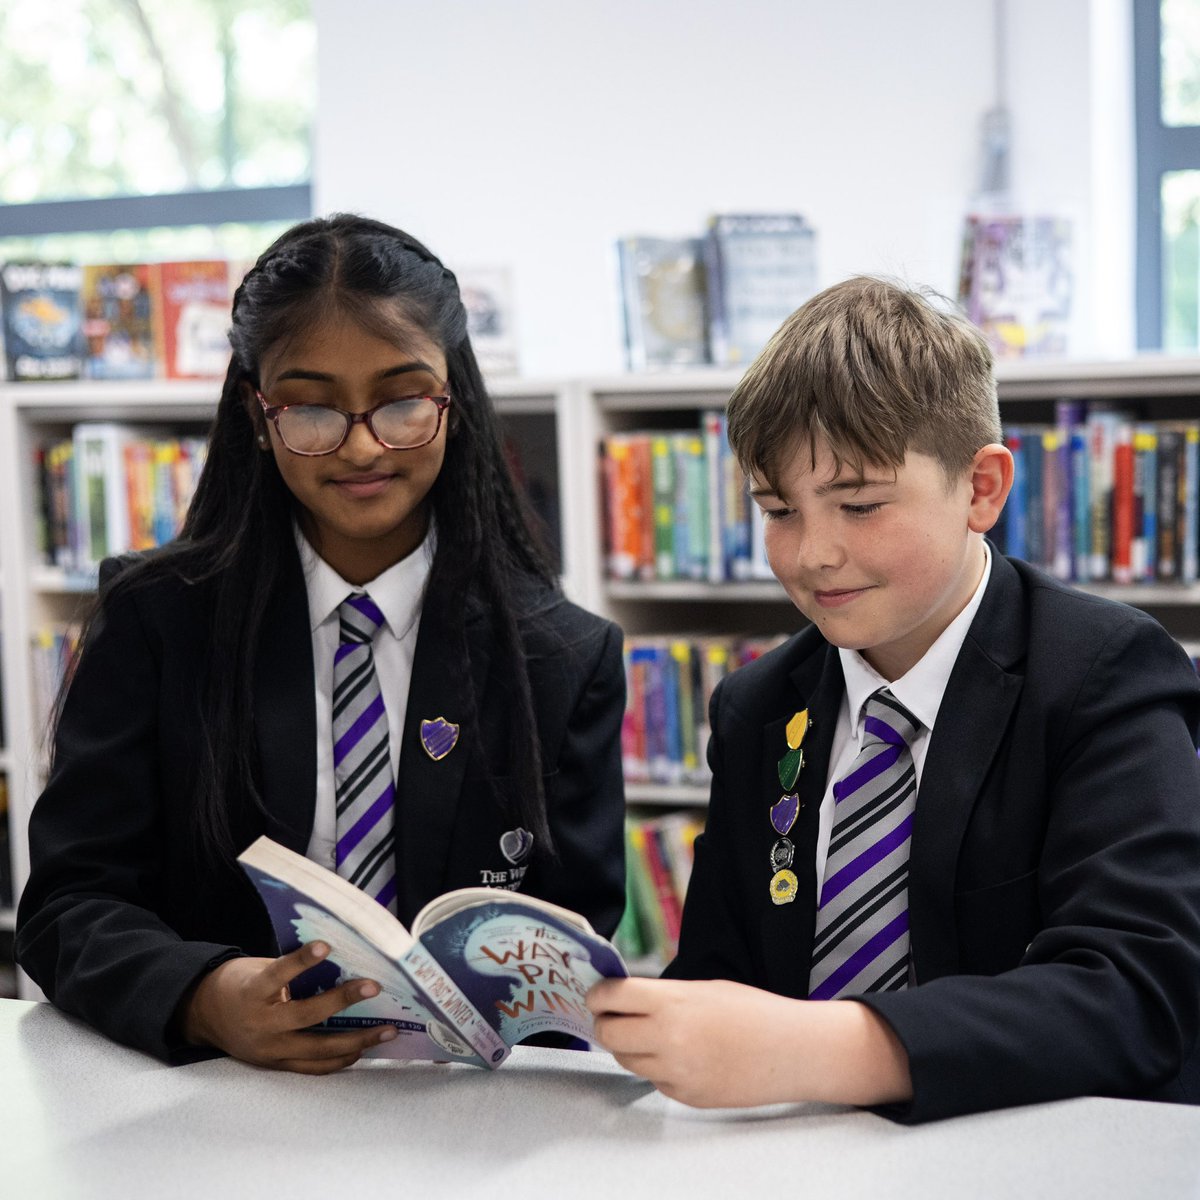 Calling Year 7 Families! We look forward to seeing you at our Year 7 Parents’ Evening on Thursday 16th May! Book your appointments today. More information can be found here: thewellsacademy.org/attachments/do…